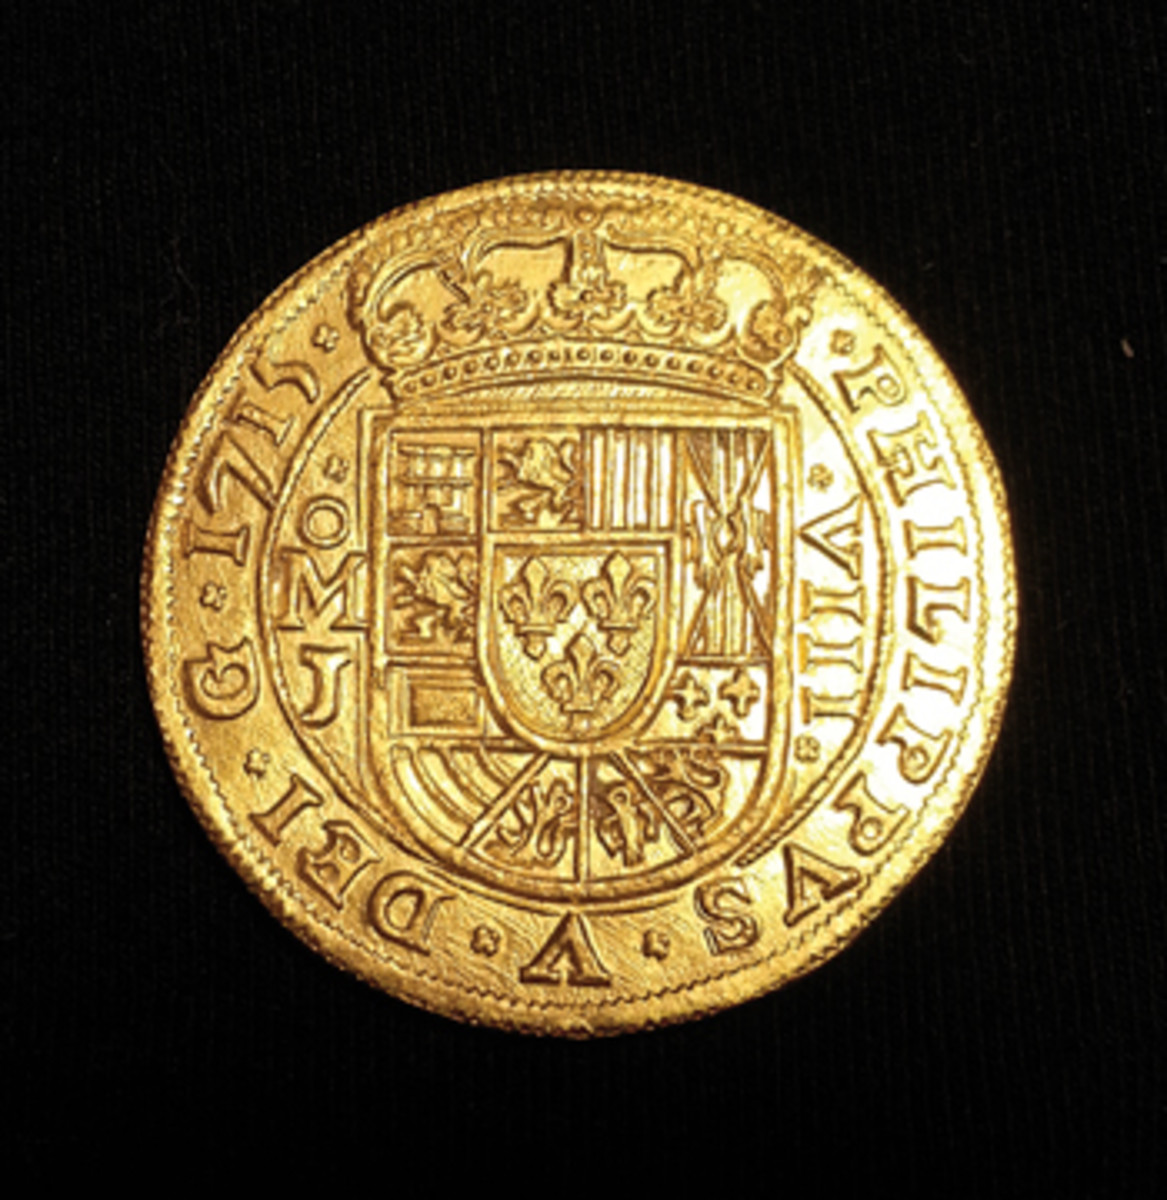 A rare “Tricentennial Royal” coin valued at $500,000 was part of the haul.